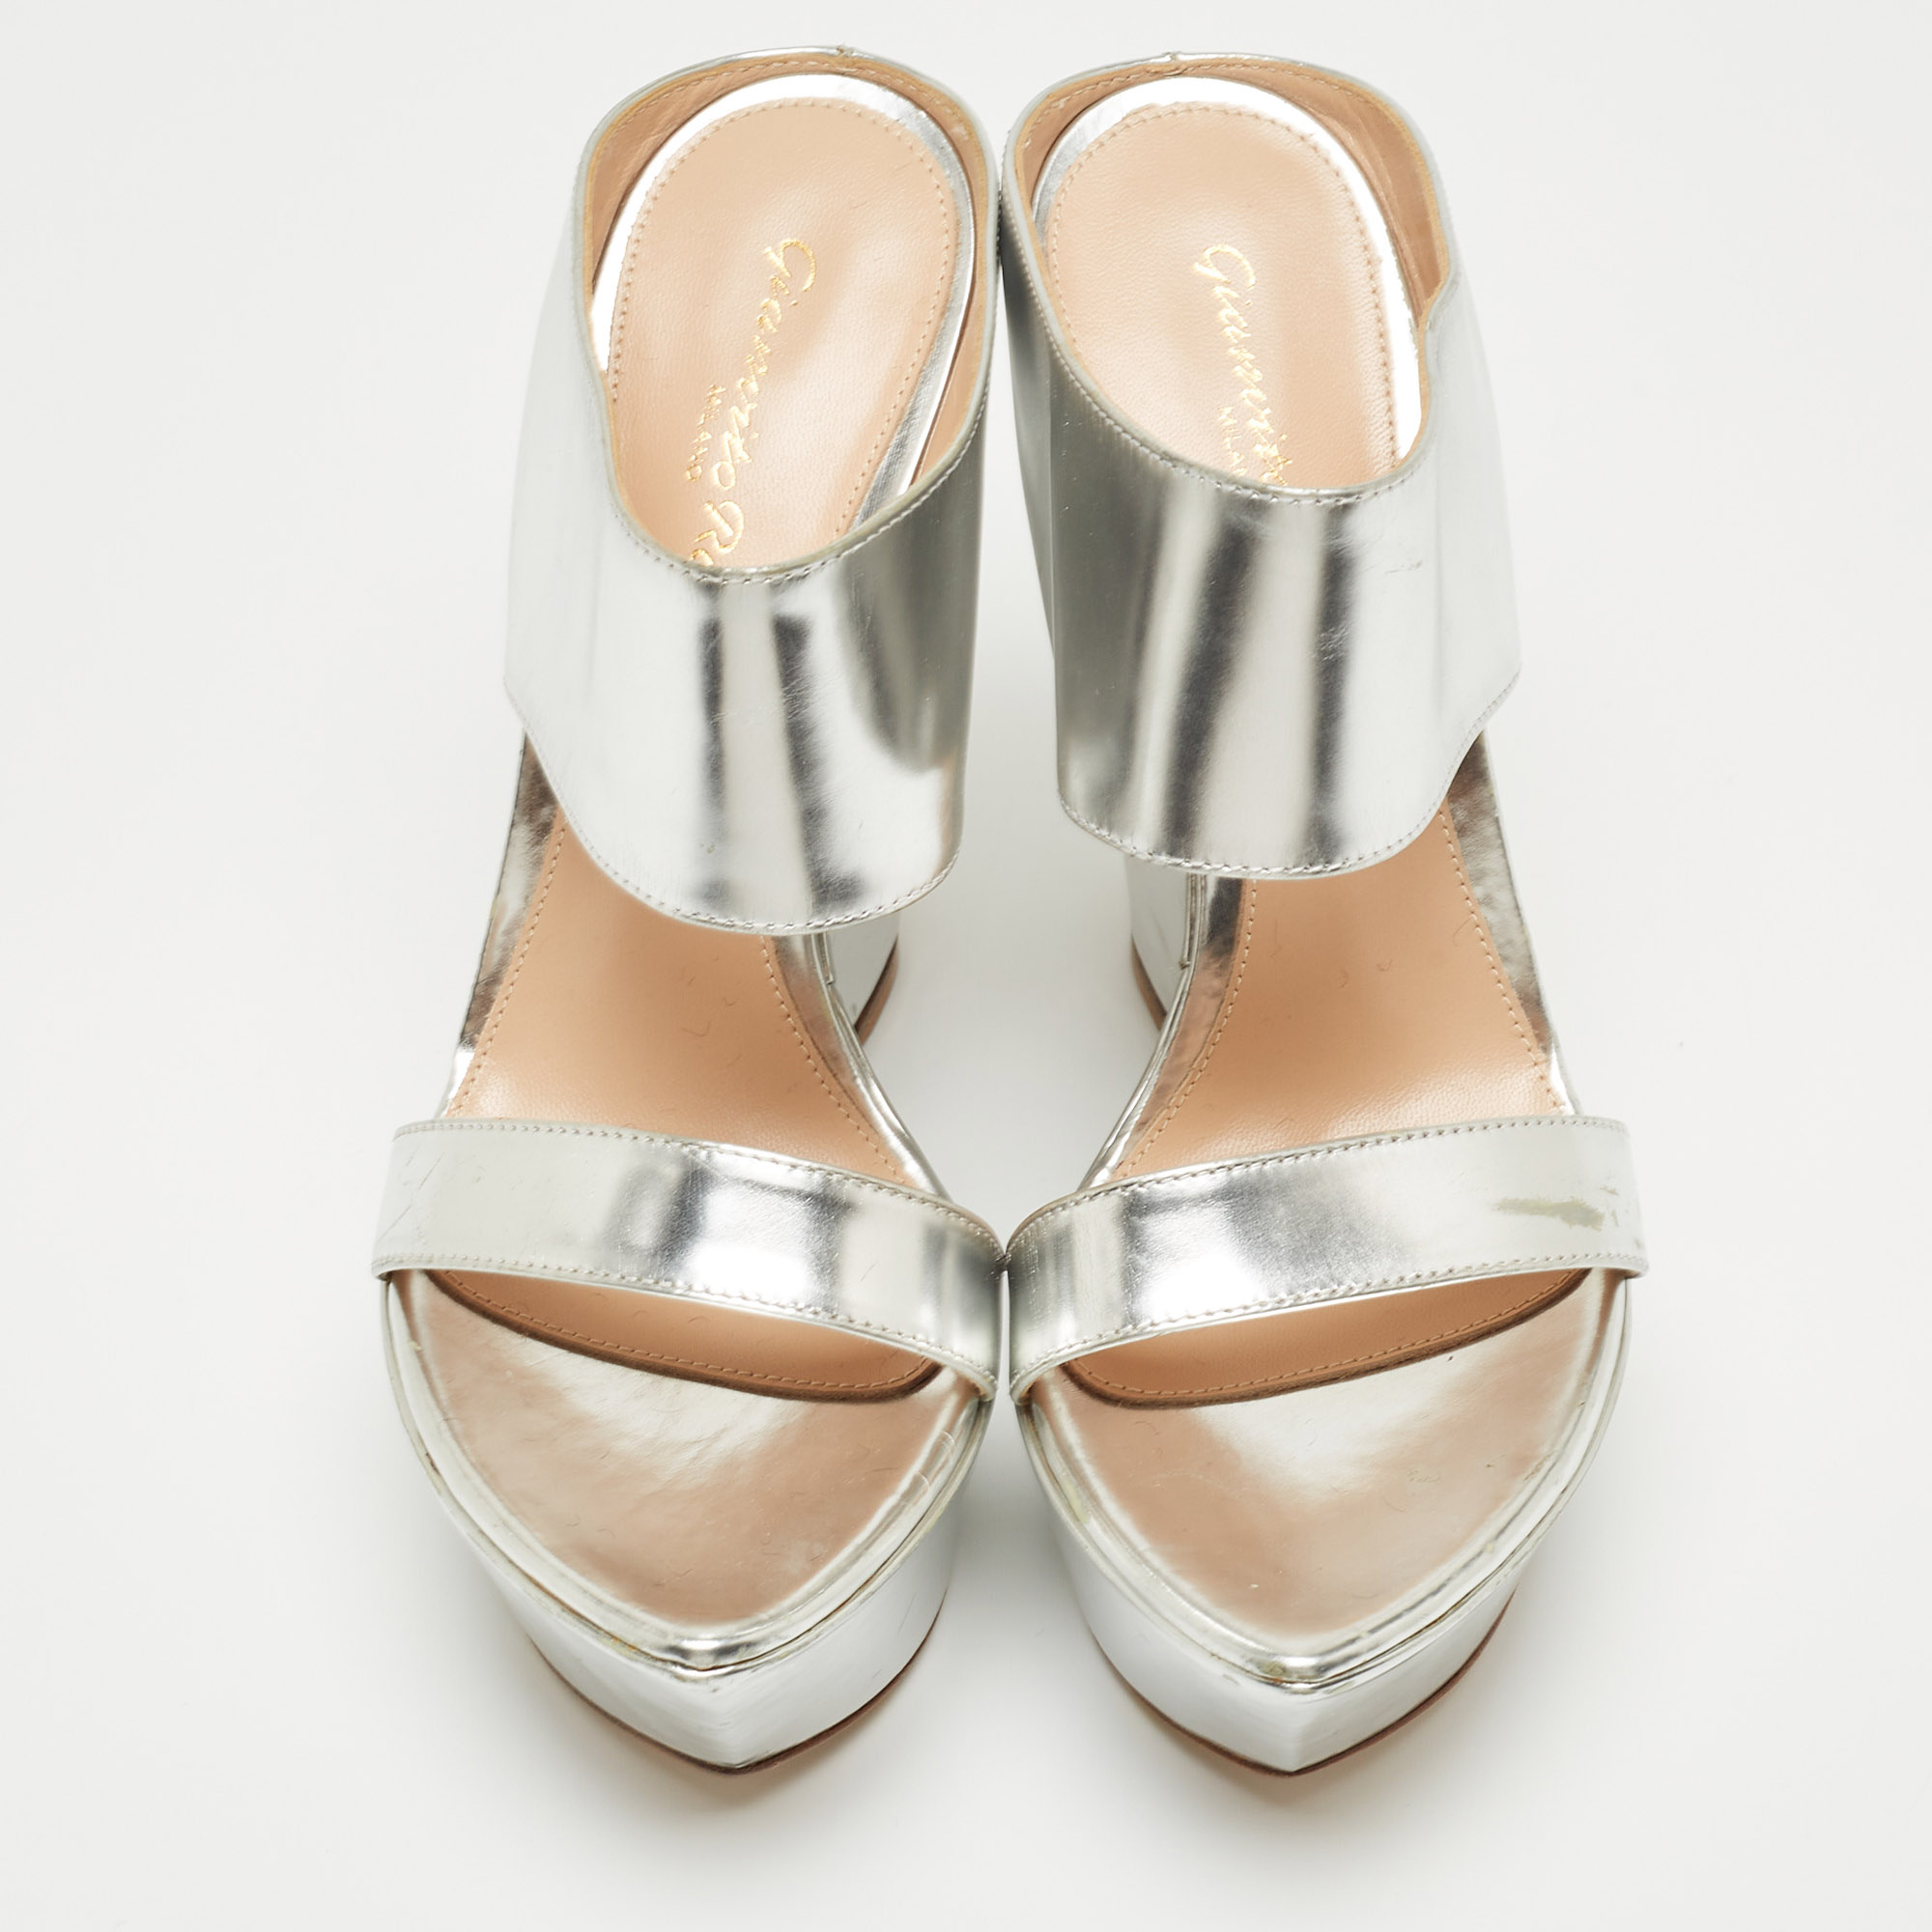 Gianvito Rossi Silver Leather Wedge Slide Sandals Size 36